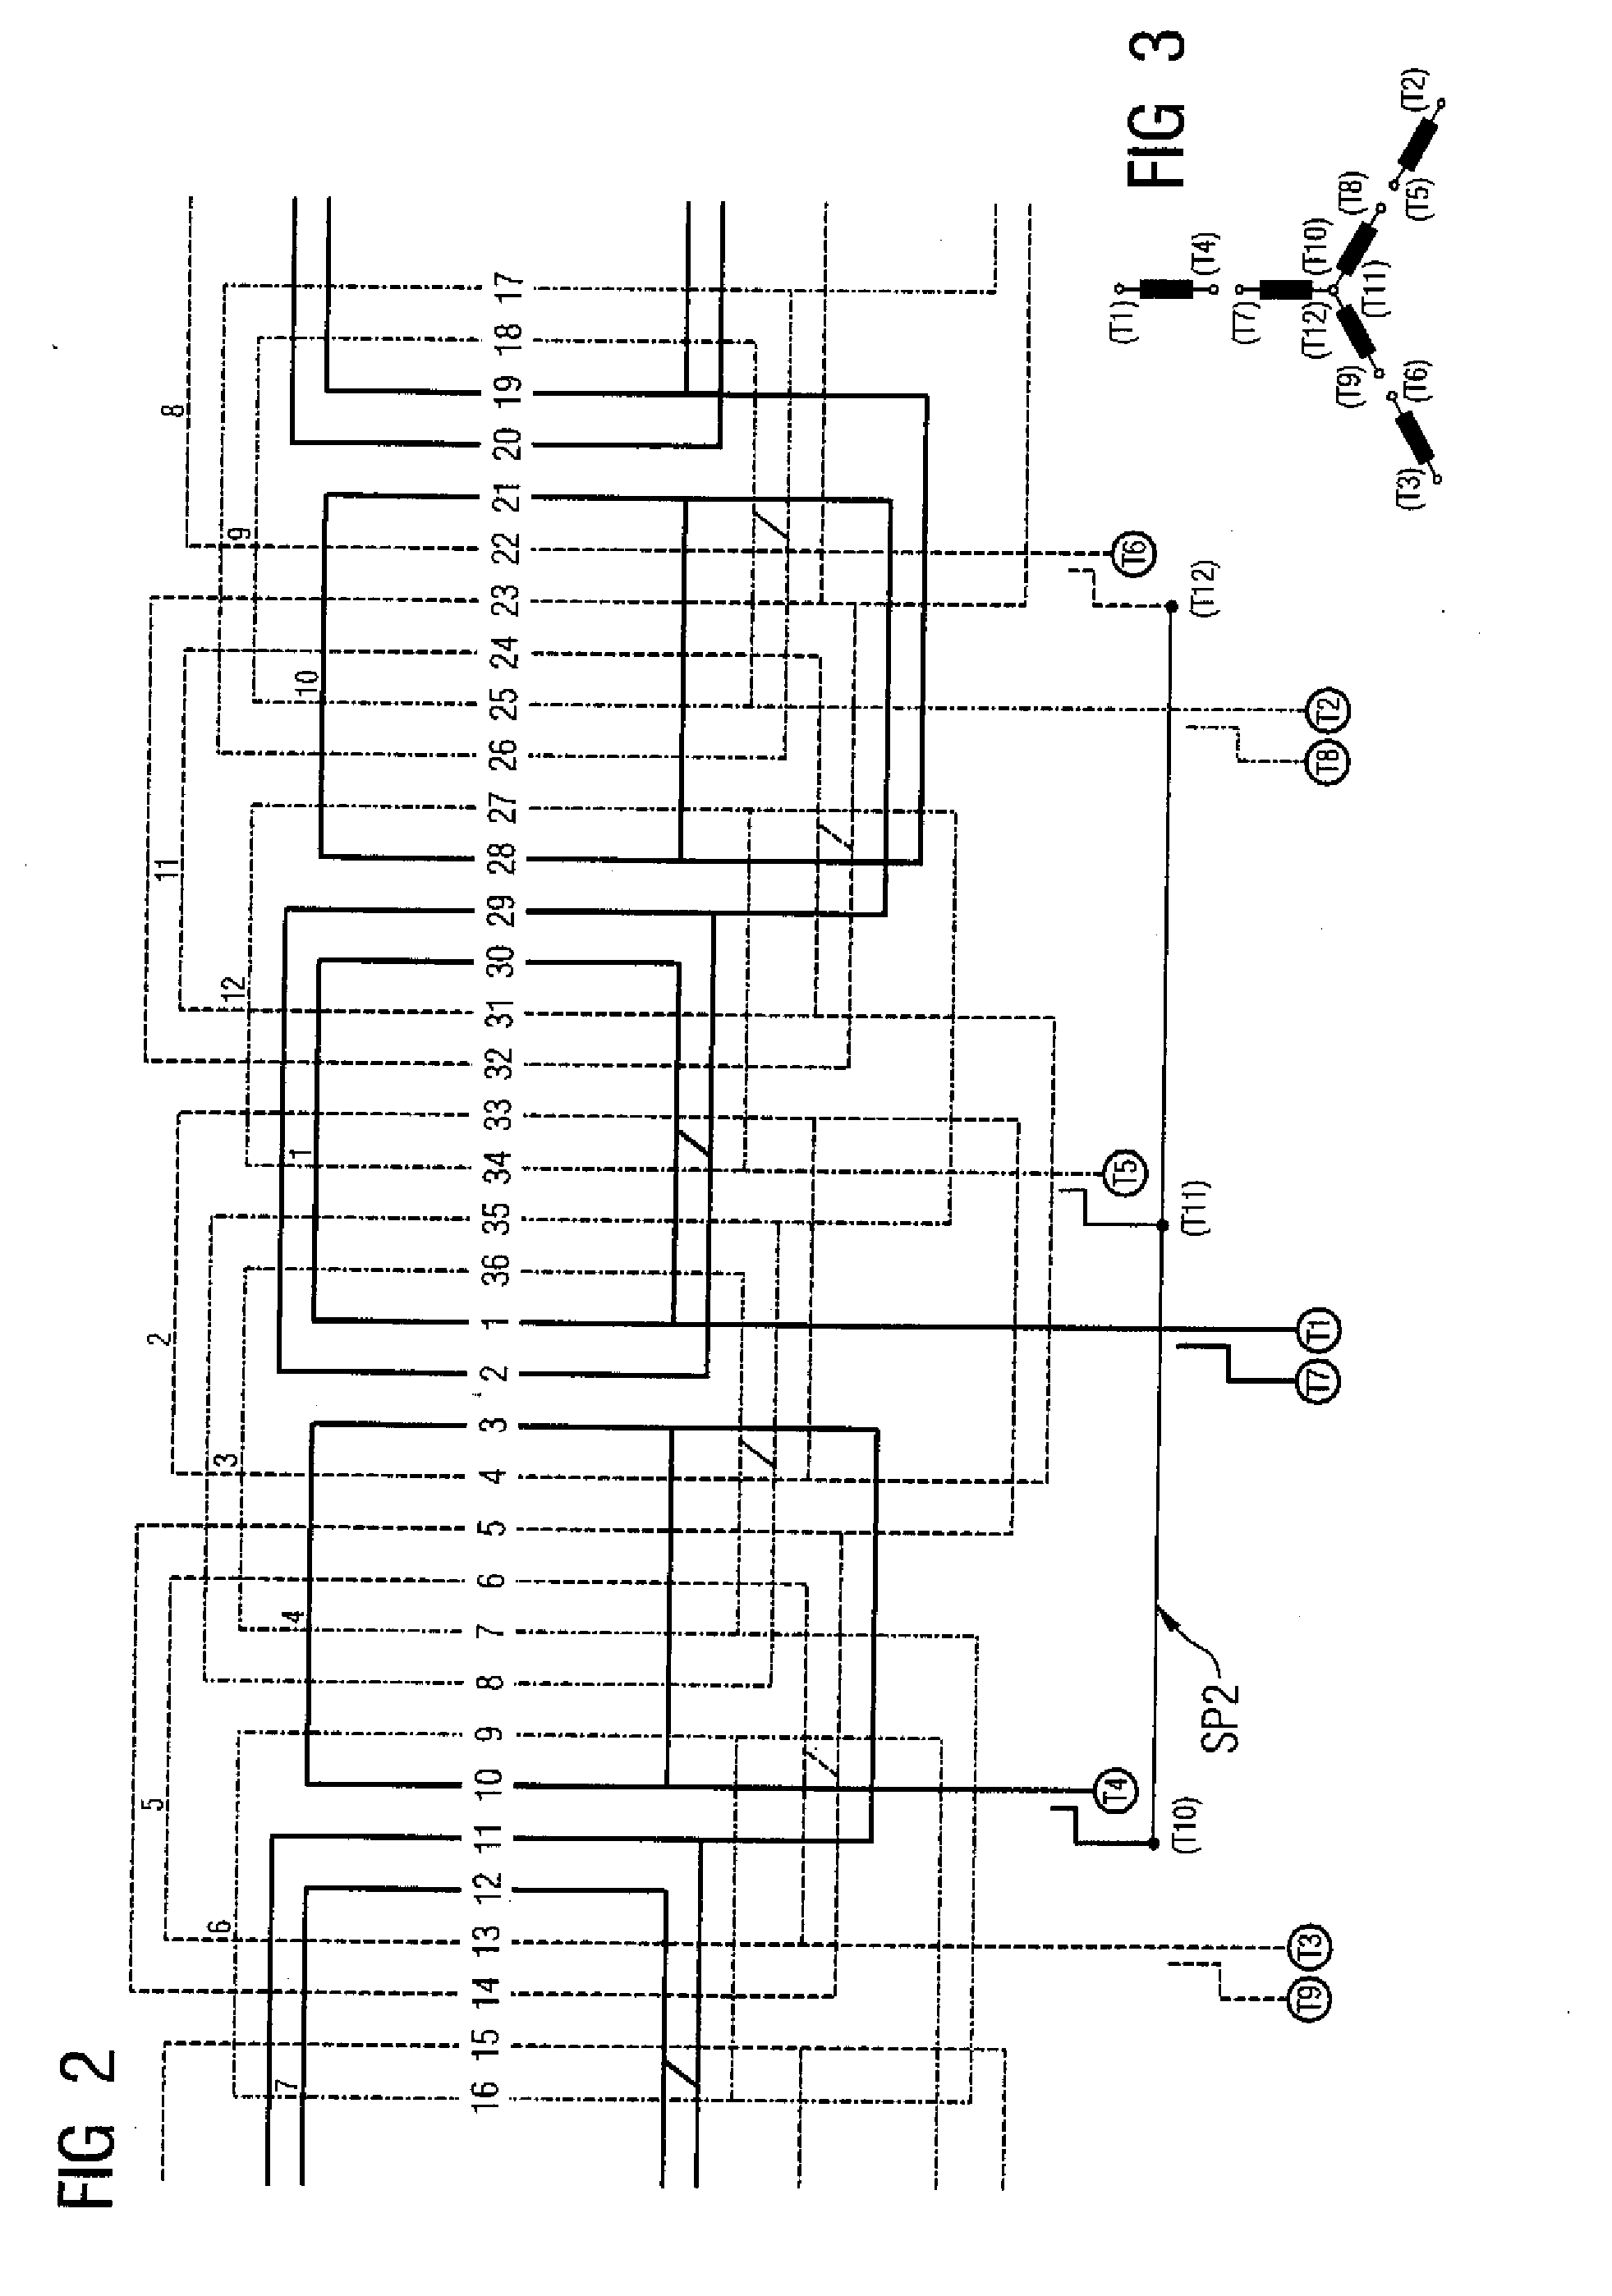 Electrical machine with part-winding circuit